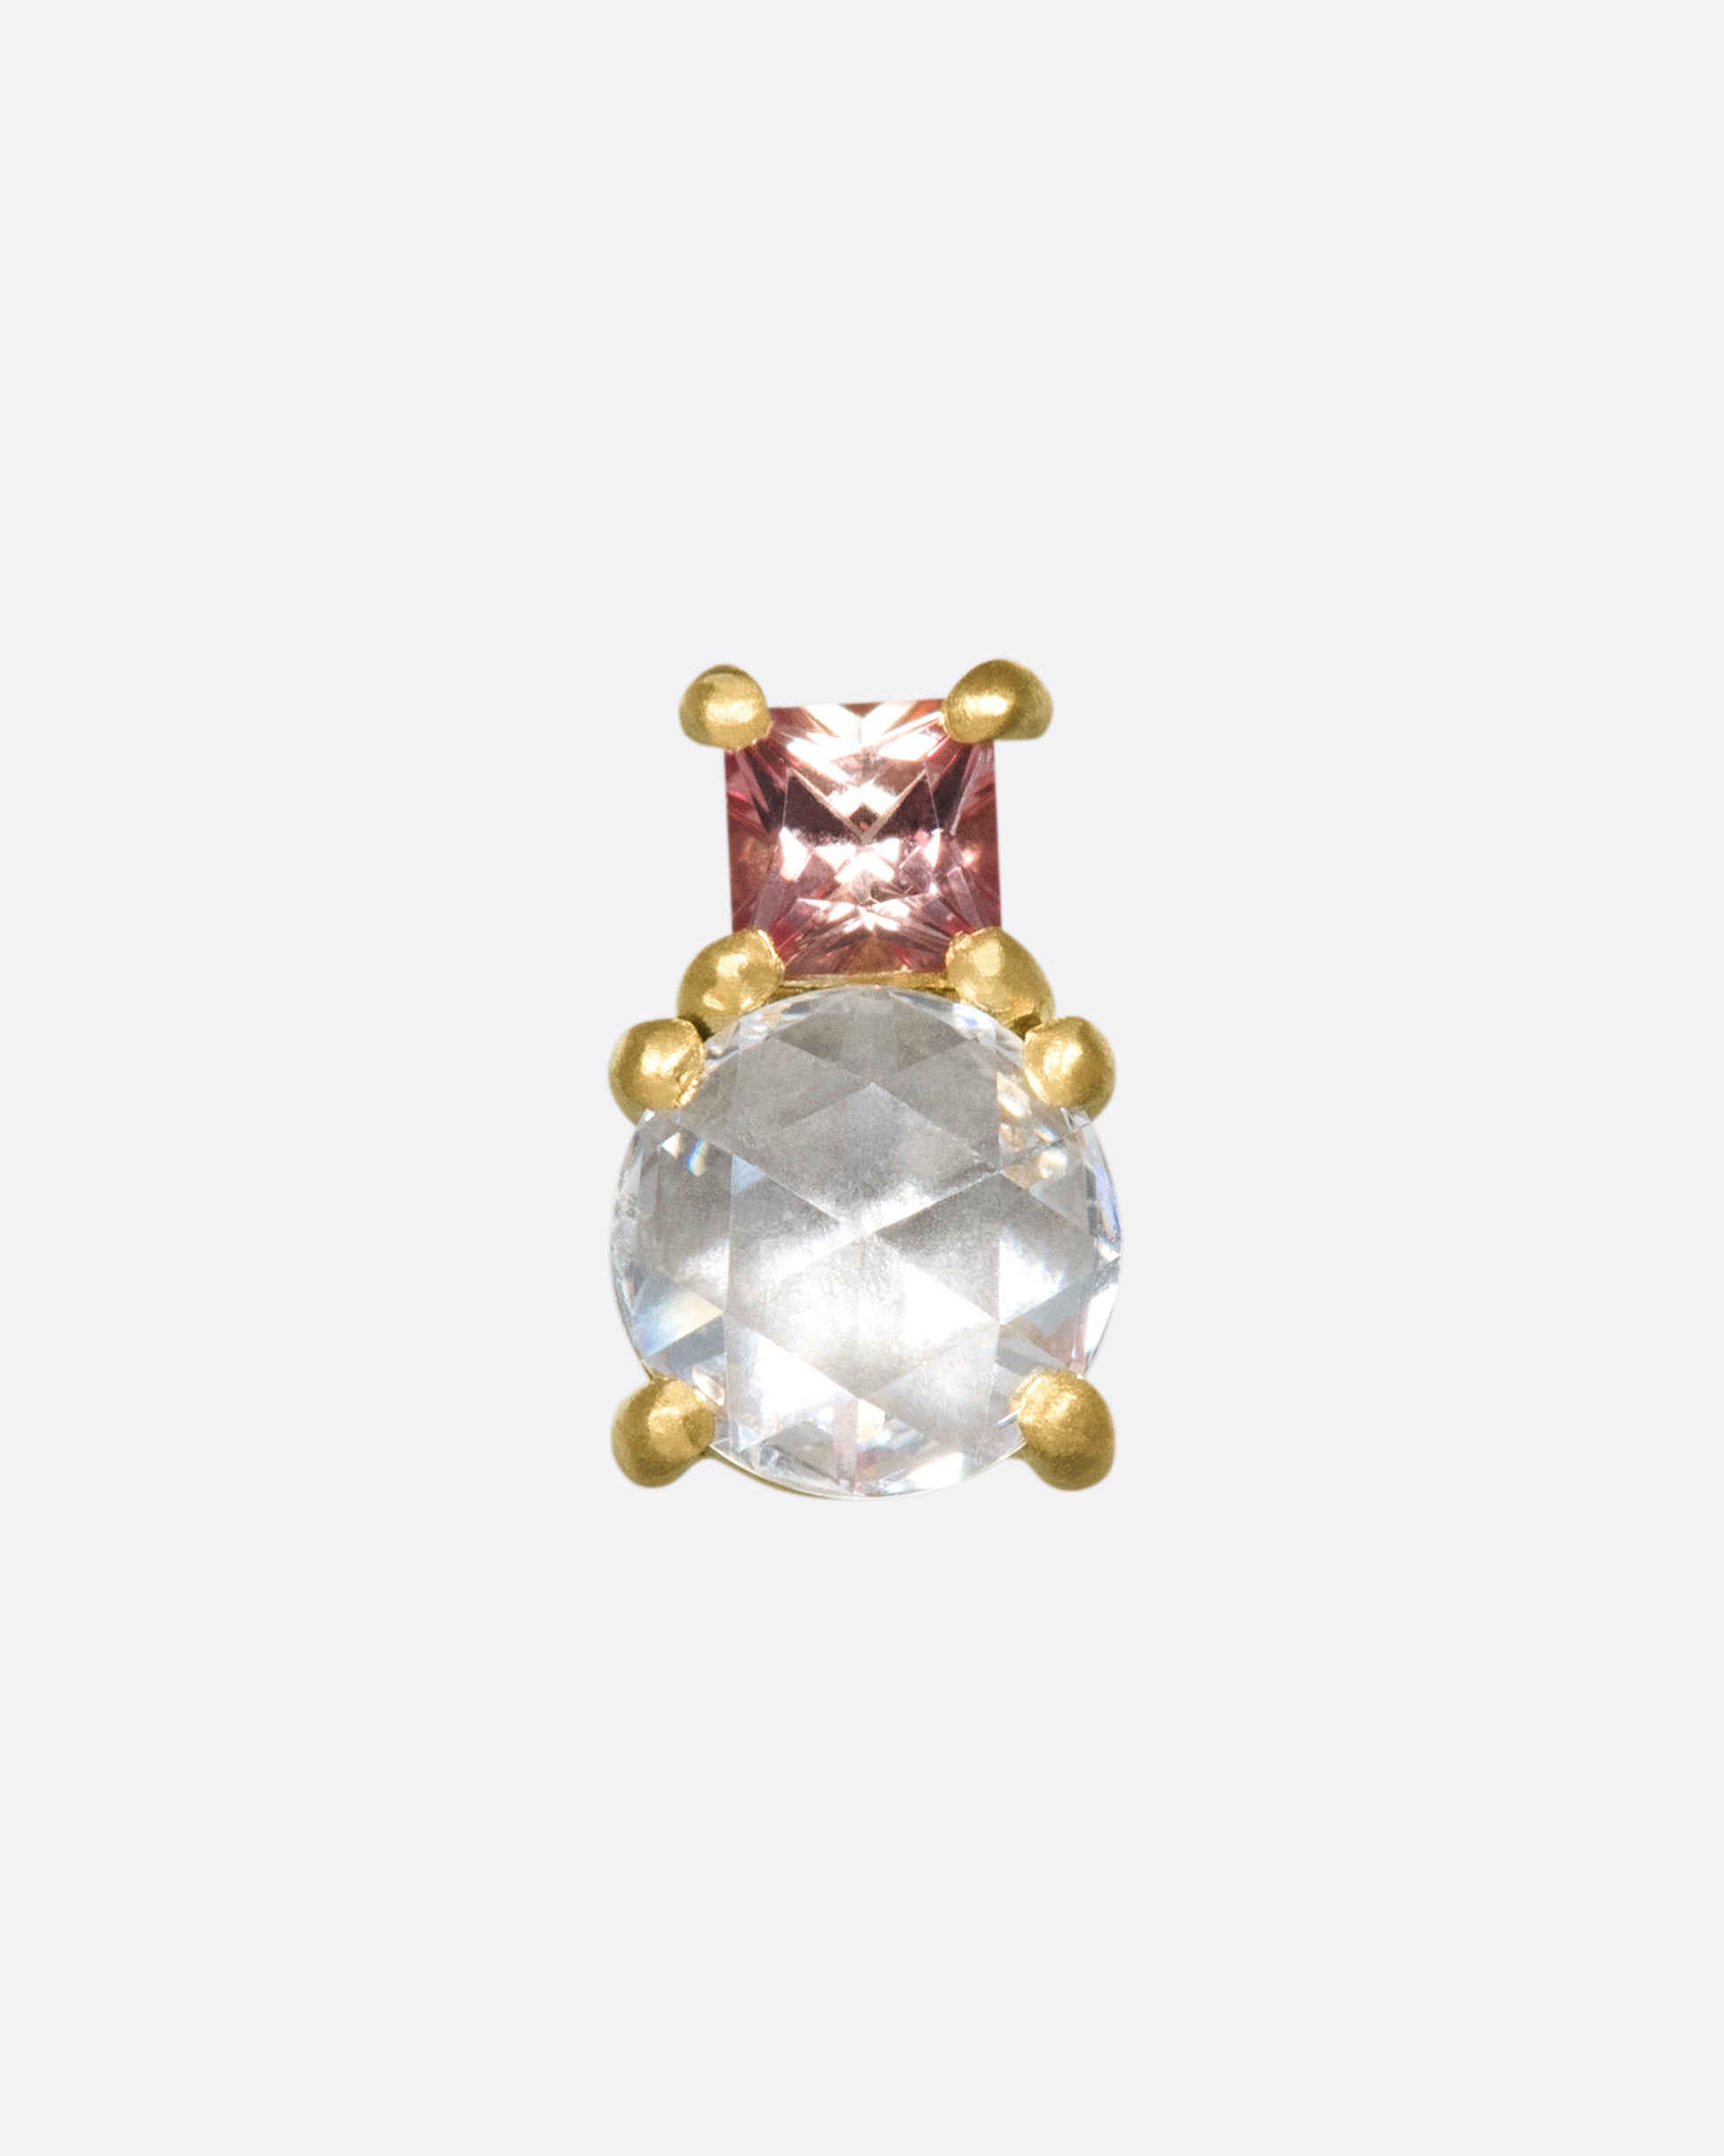 An uncommon combination; a rose cut diamond with a peachy pink princess cut sapphire.